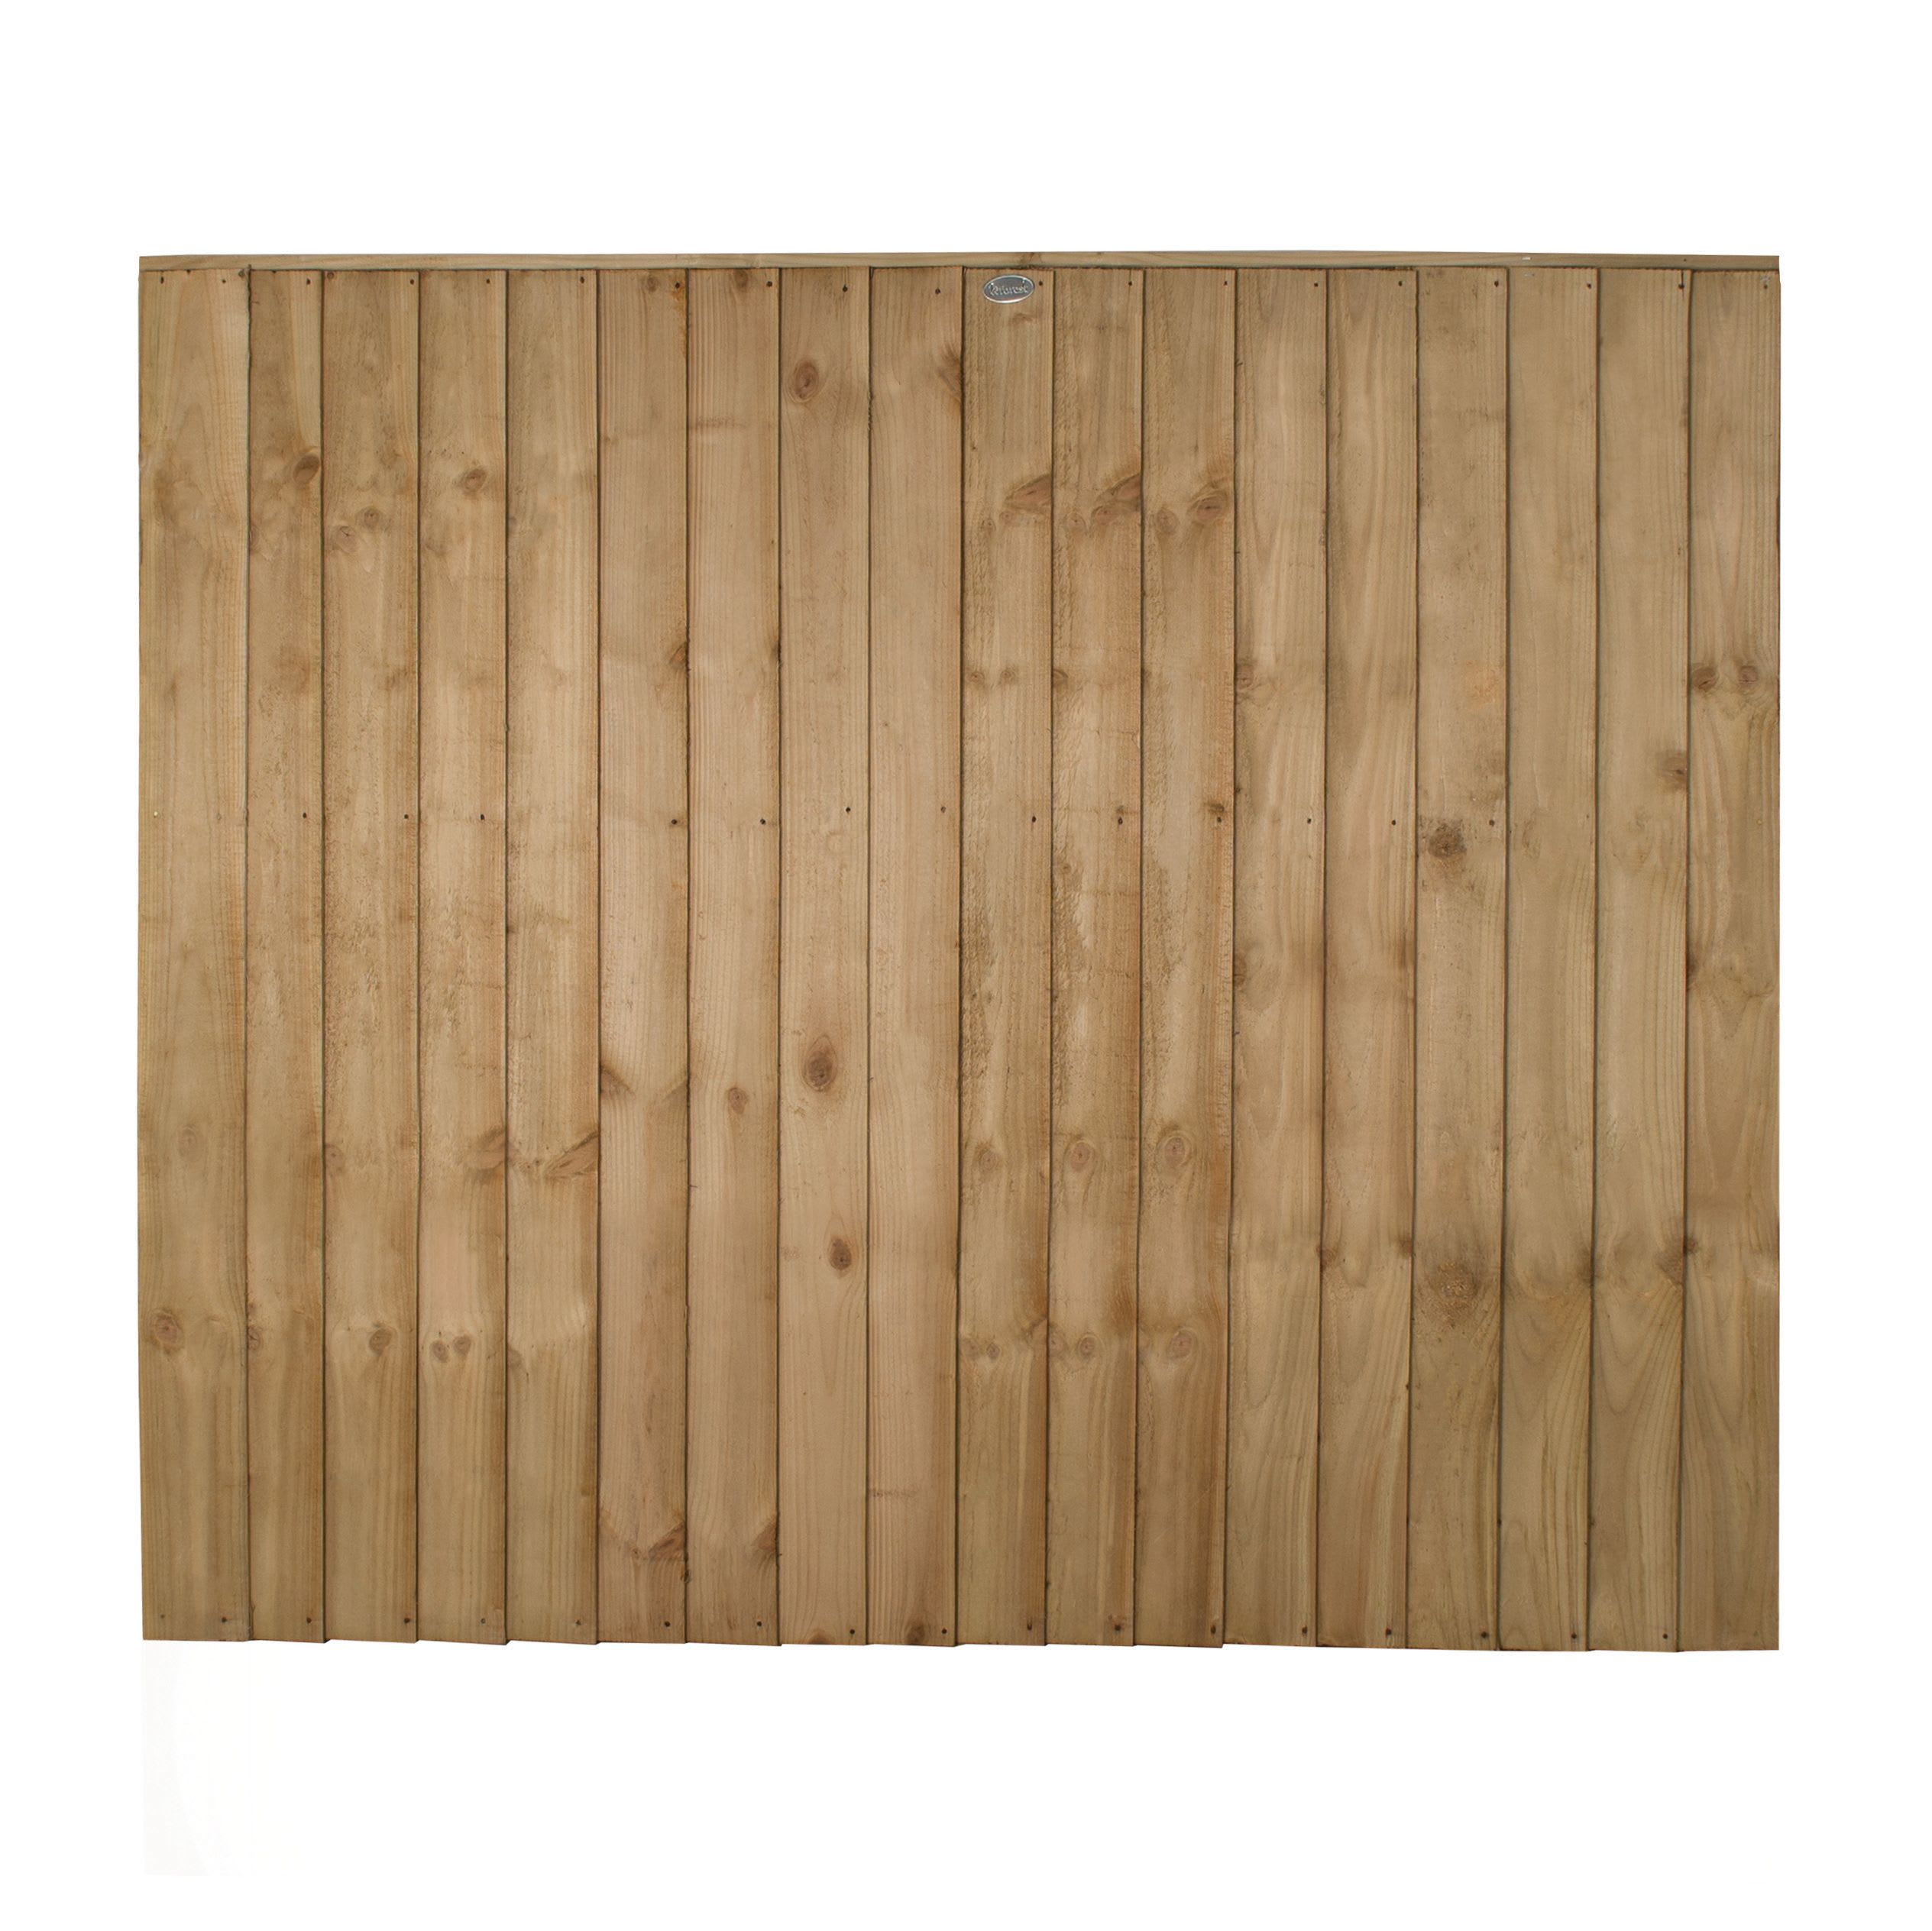 Forest Garden Pressure Treated Featheredge Fence Panel -